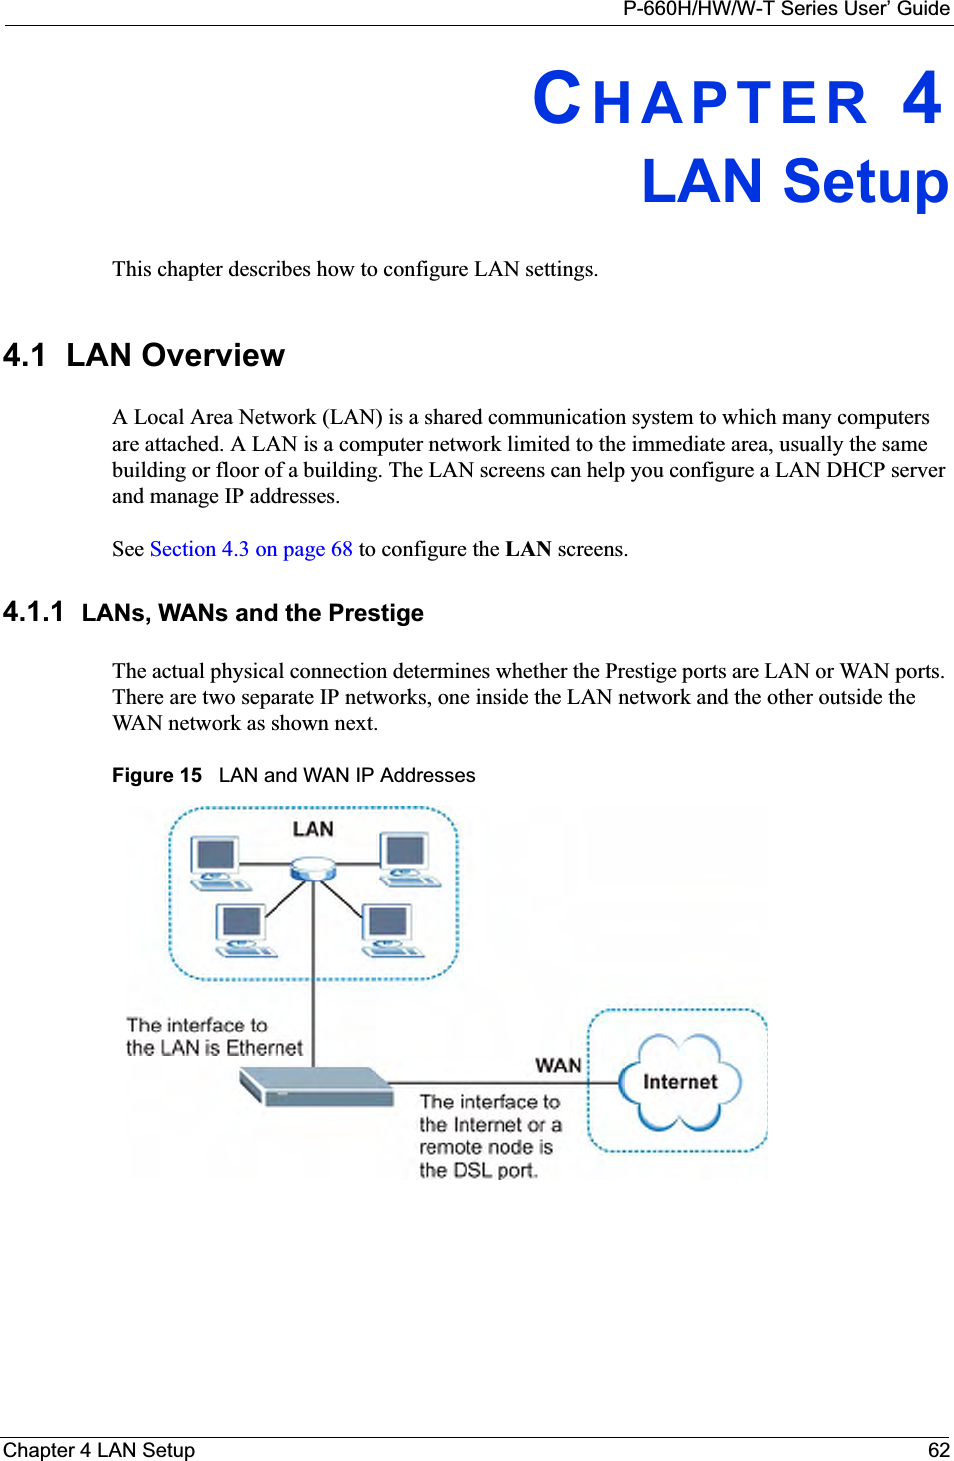 P-660H/HW/W-T Series User’ GuideChapter 4 LAN Setup 62CHAPTER 4LAN SetupThis chapter describes how to configure LAN settings.4.1  LAN Overview A Local Area Network (LAN) is a shared communication system to which many computers are attached. A LAN is a computer network limited to the immediate area, usually the same building or floor of a building. The LAN screens can help you configure a LAN DHCP server and manage IP addresses.  See Section 4.3 on page 68 to configure the LAN screens. 4.1.1 LANs, WANs and the PrestigeThe actual physical connection determines whether the Prestige ports are LAN or WAN ports. There are two separate IP networks, one inside the LAN network and the other outside the WAN network as shown next.Figure 15   LAN and WAN IP Addresses